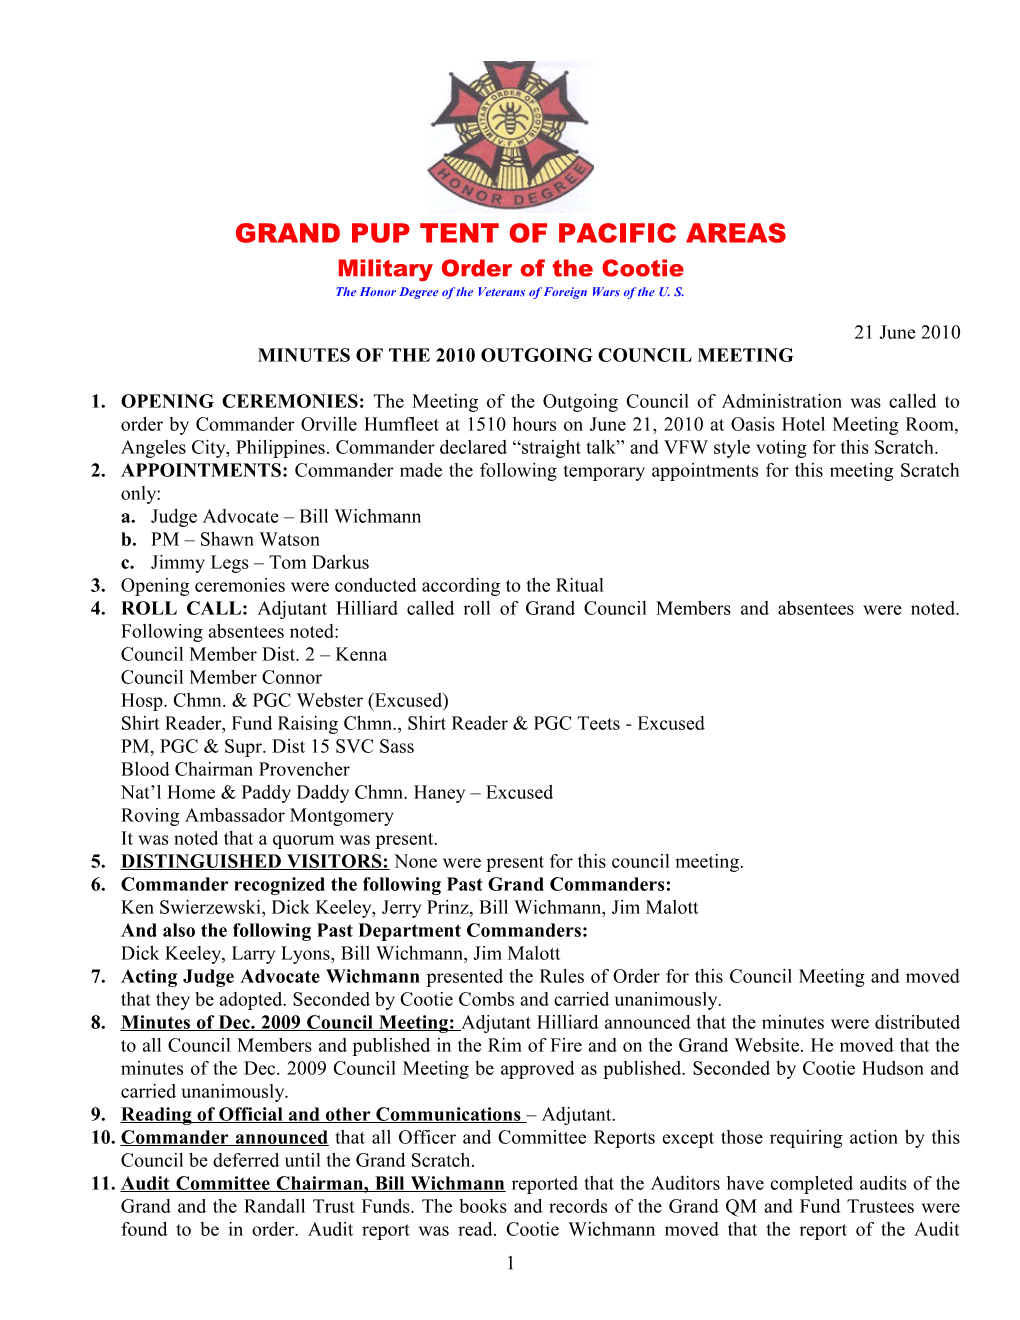 Grand Pup Tent of Pacific Areas